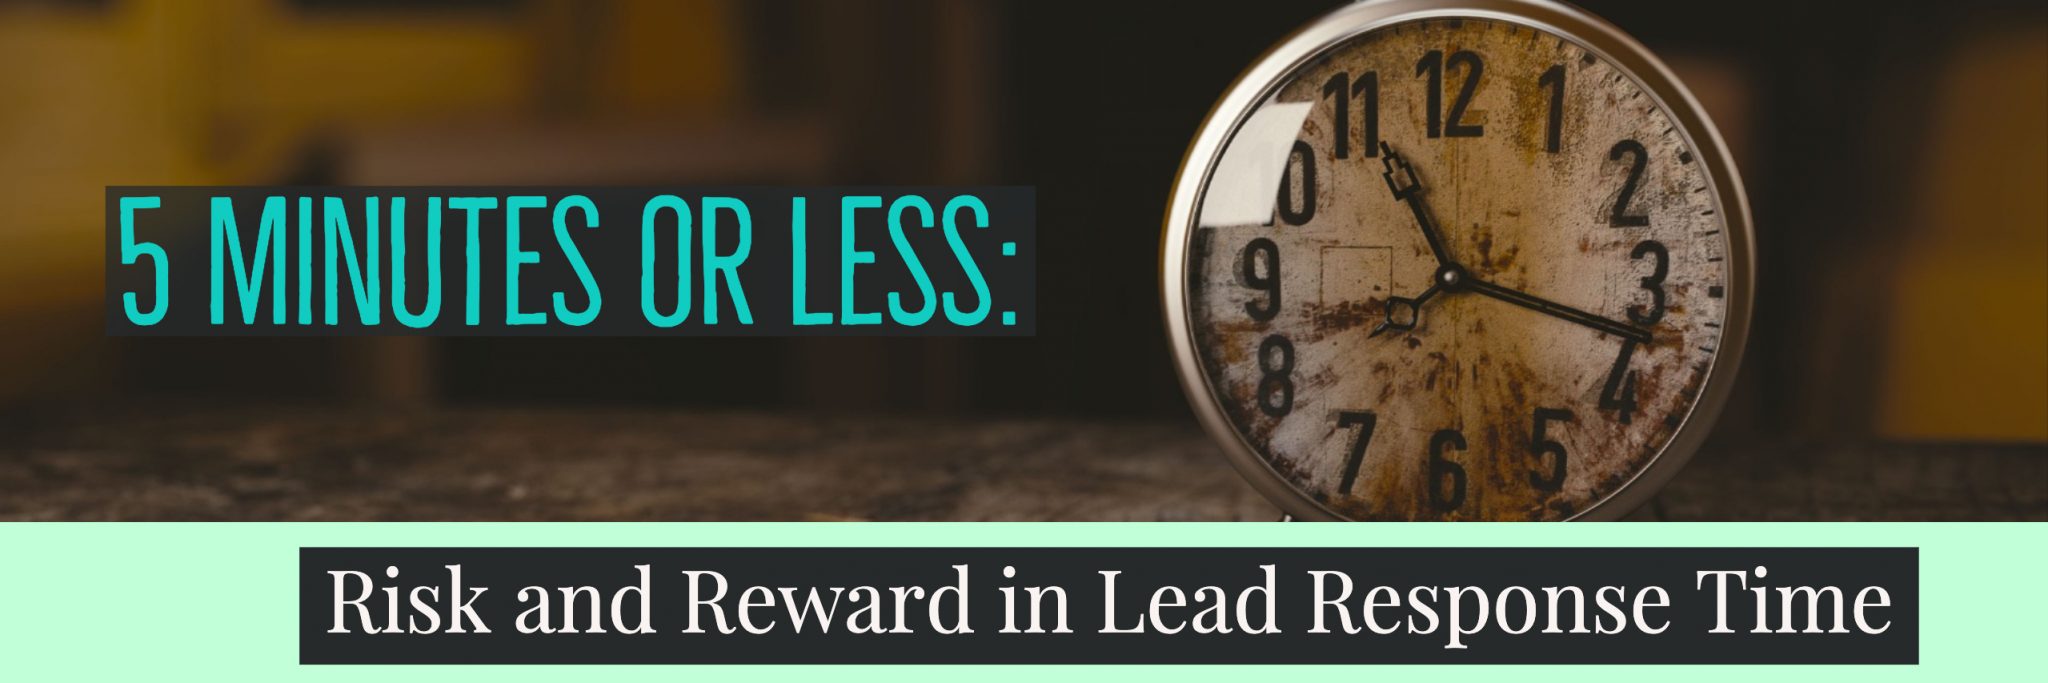 5 Minutes or Less_ Risk and Reward in Lead Response Time